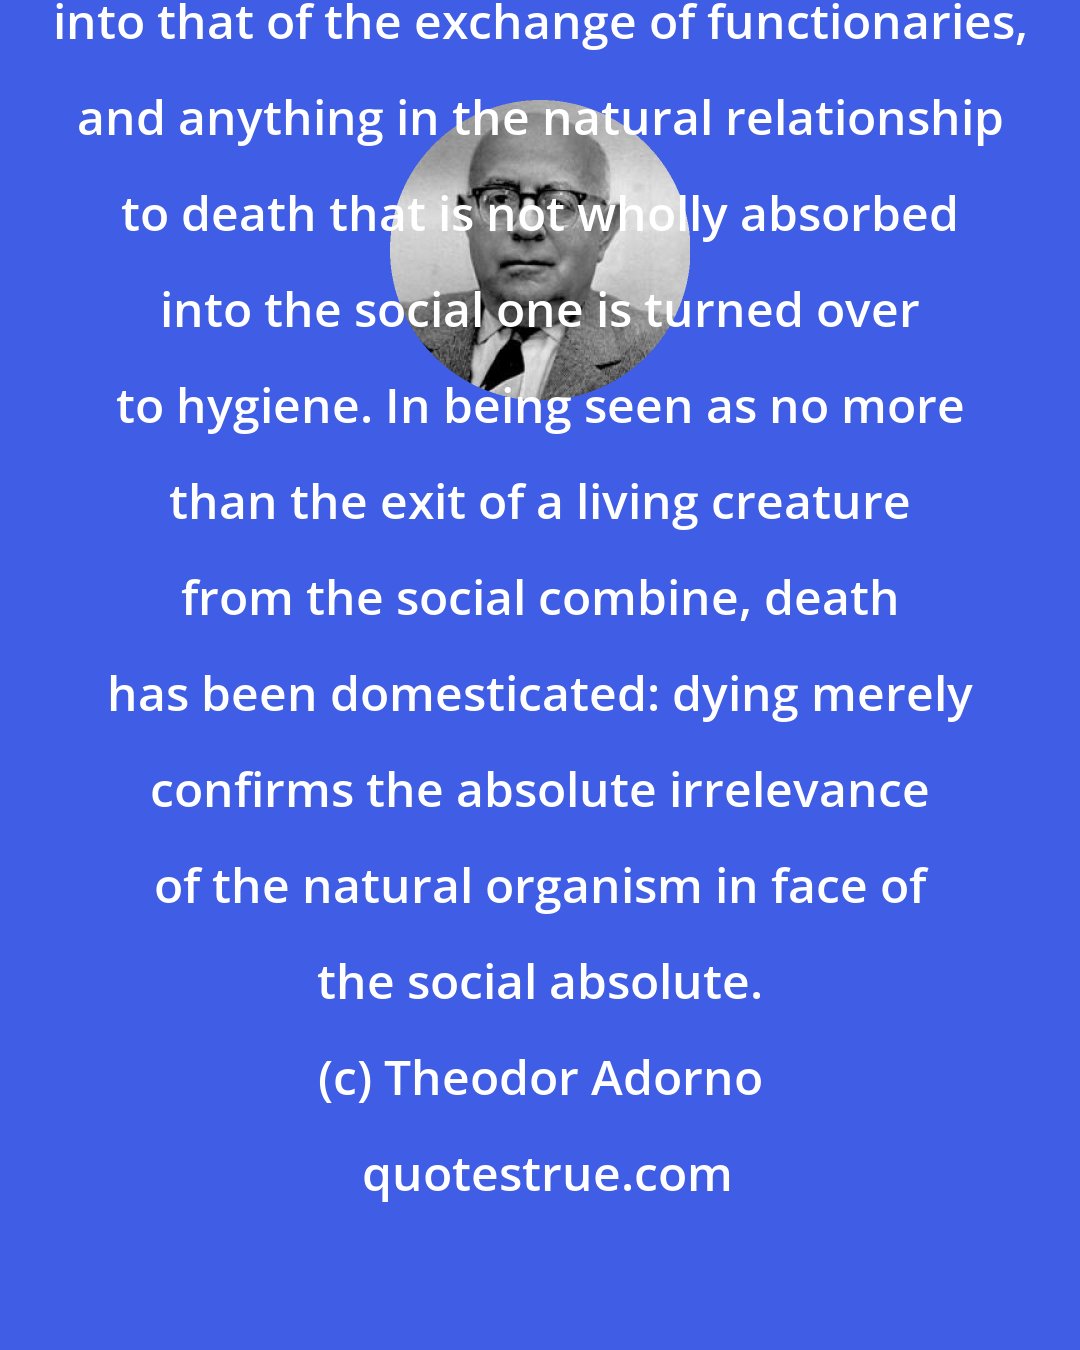 Theodor Adorno: So the experience of death is turned into that of the exchange of functionaries, and anything in the natural relationship to death that is not wholly absorbed into the social one is turned over to hygiene. In being seen as no more than the exit of a living creature from the social combine, death has been domesticated: dying merely confirms the absolute irrelevance of the natural organism in face of the social absolute.